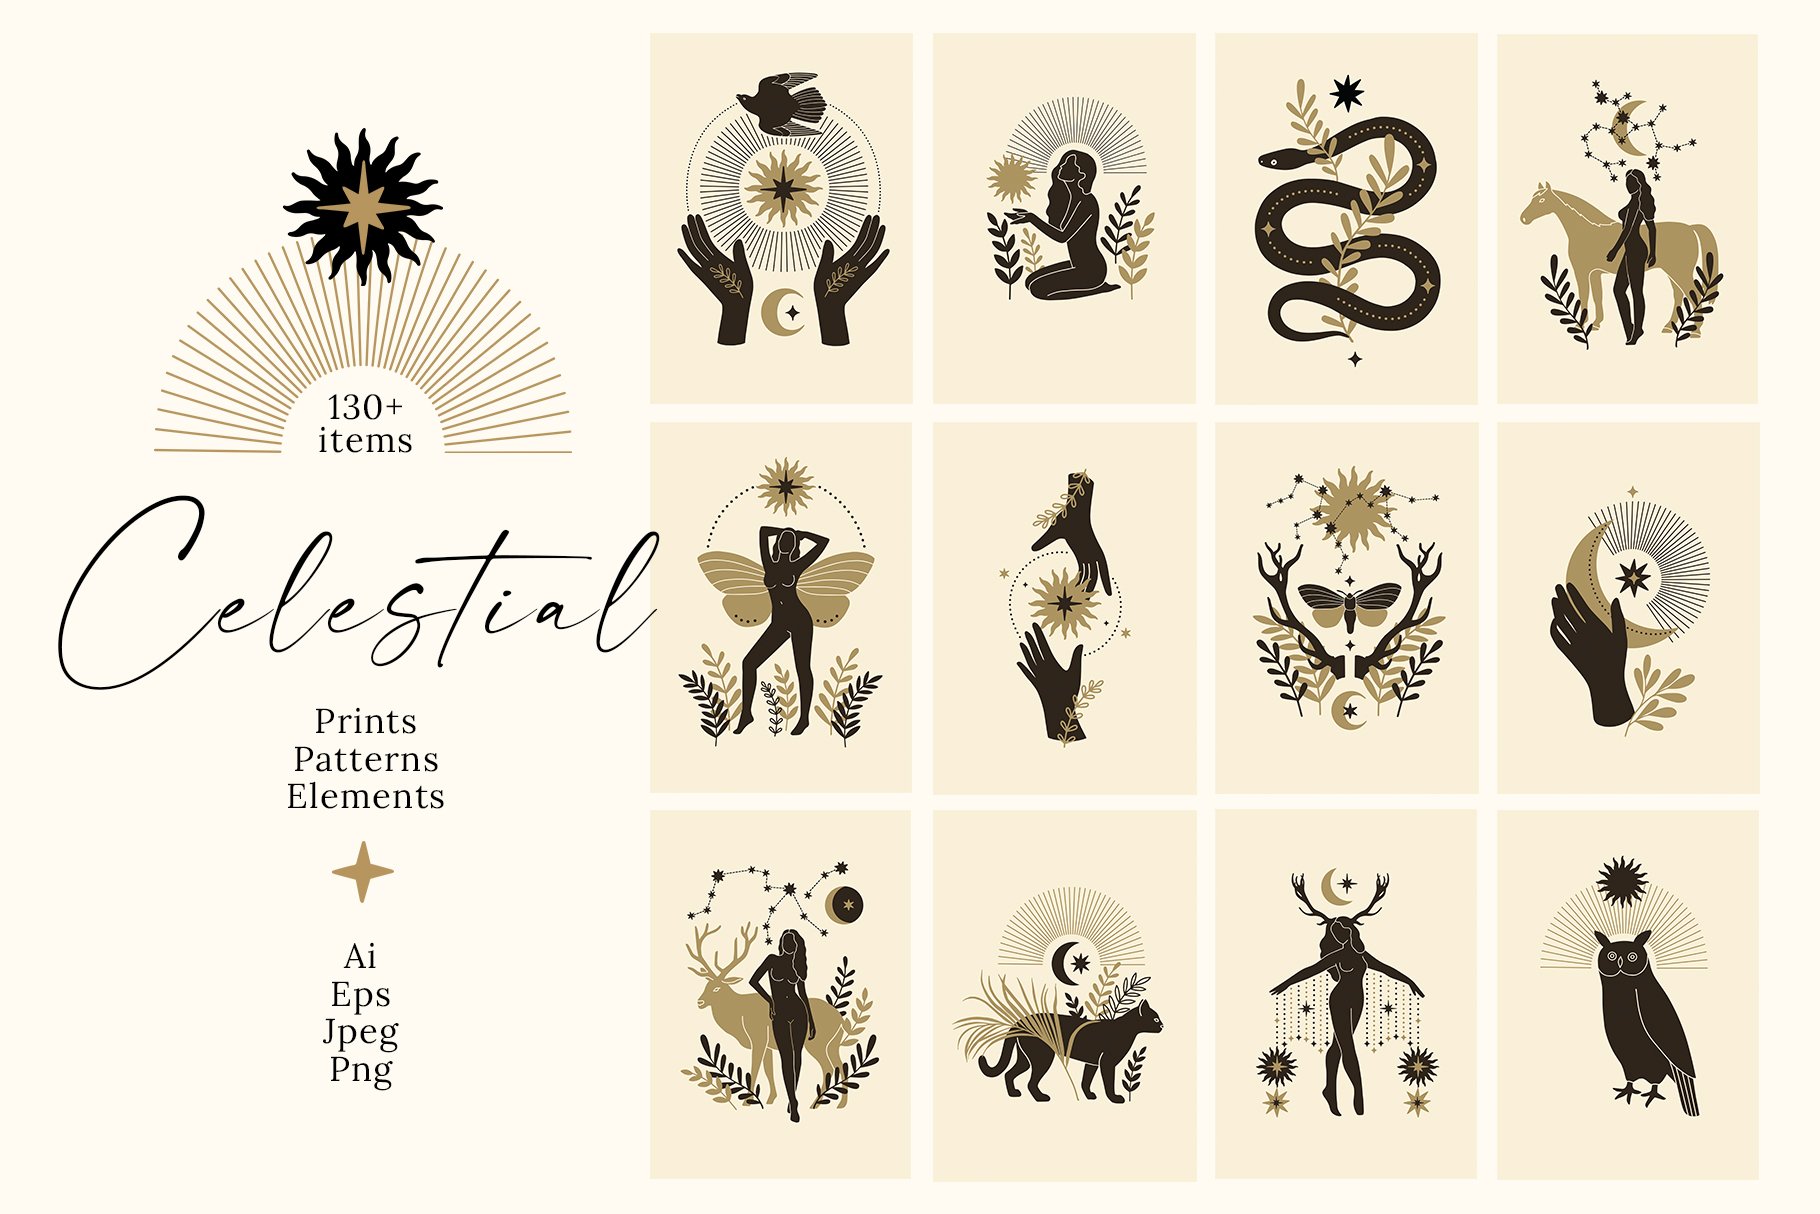 "Celestial" Illustrations&Patterns cover image.